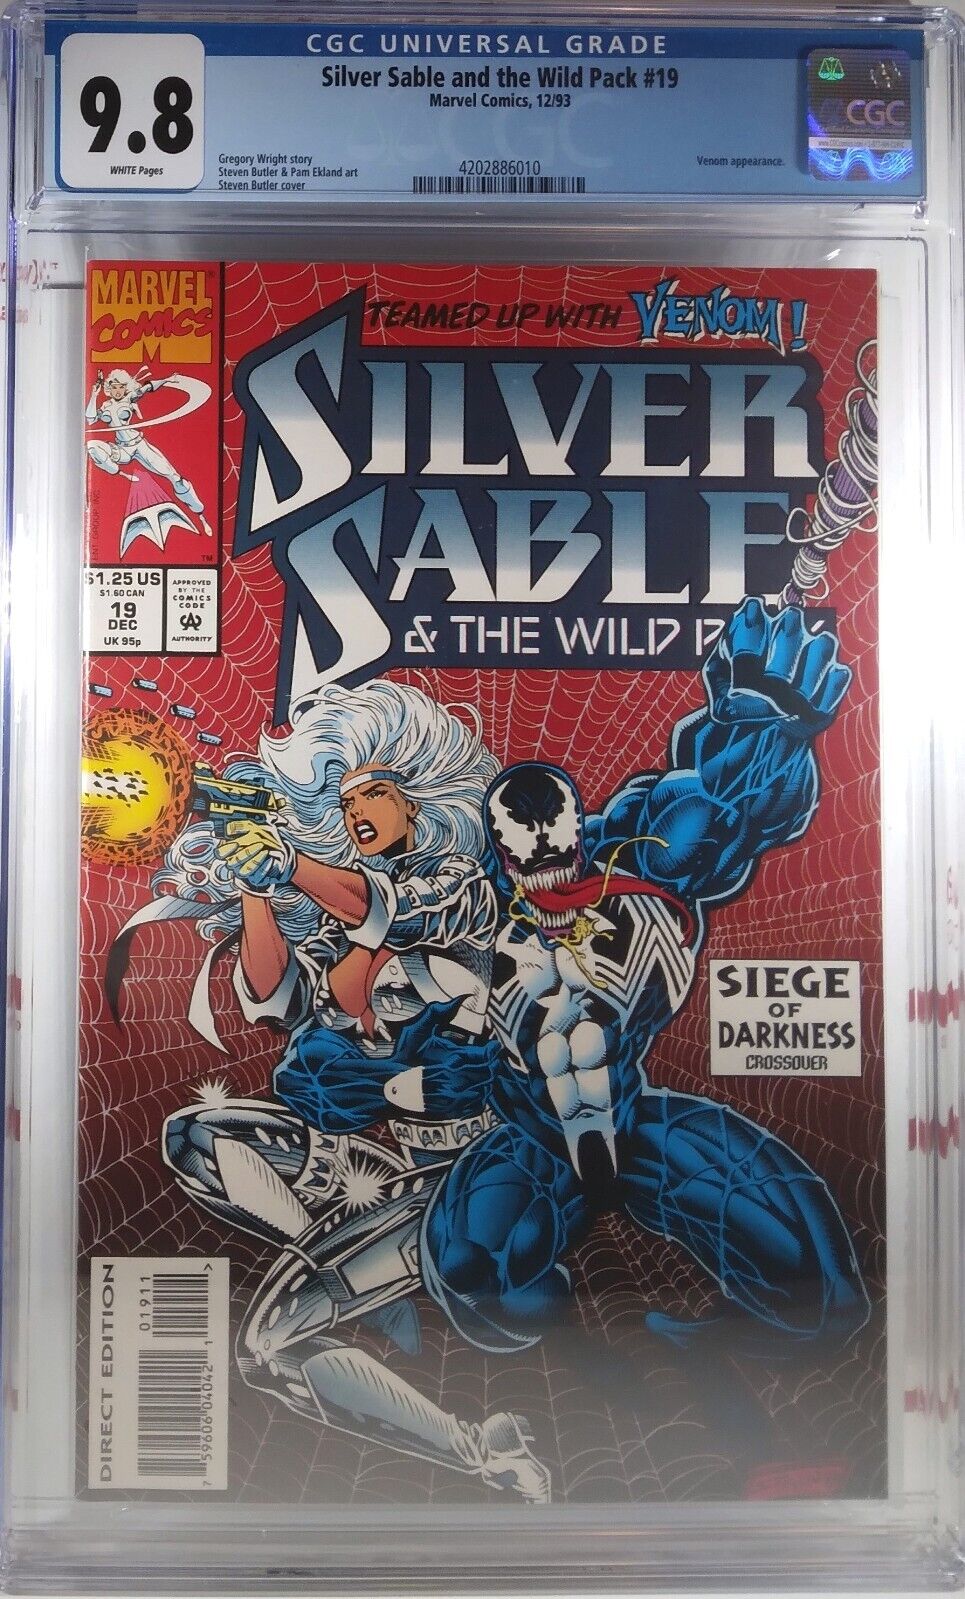 🔥 CGC 9.8 NM/MT SILVER SABLE AND THE WILD PACK #19 VENOM SIEGE OF DARKNESS 1993